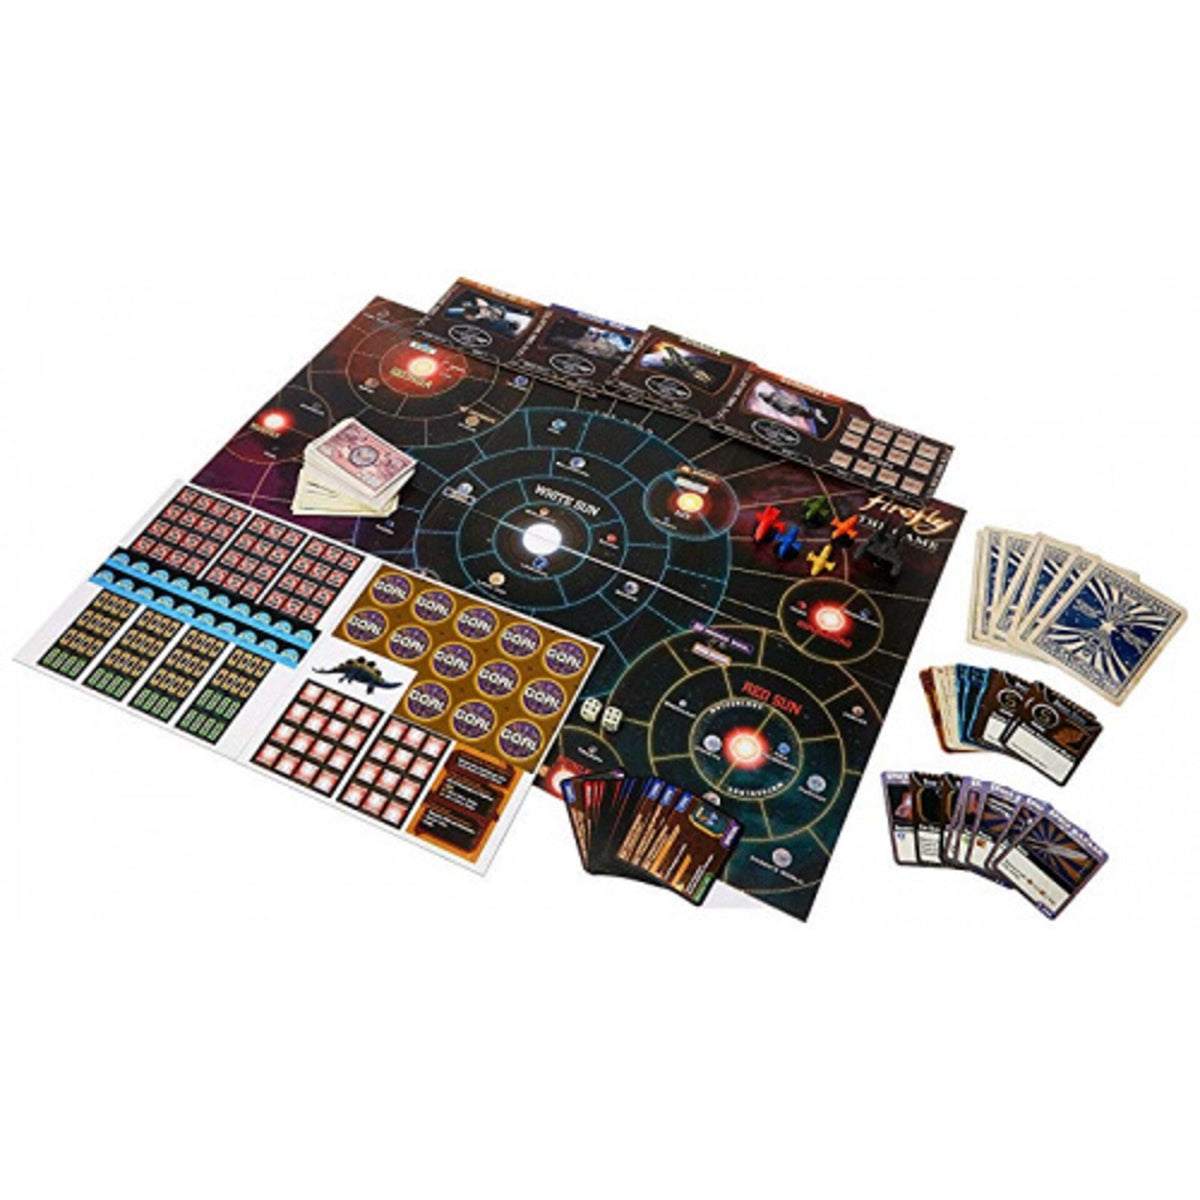 Firefly The Board Game Special Edition